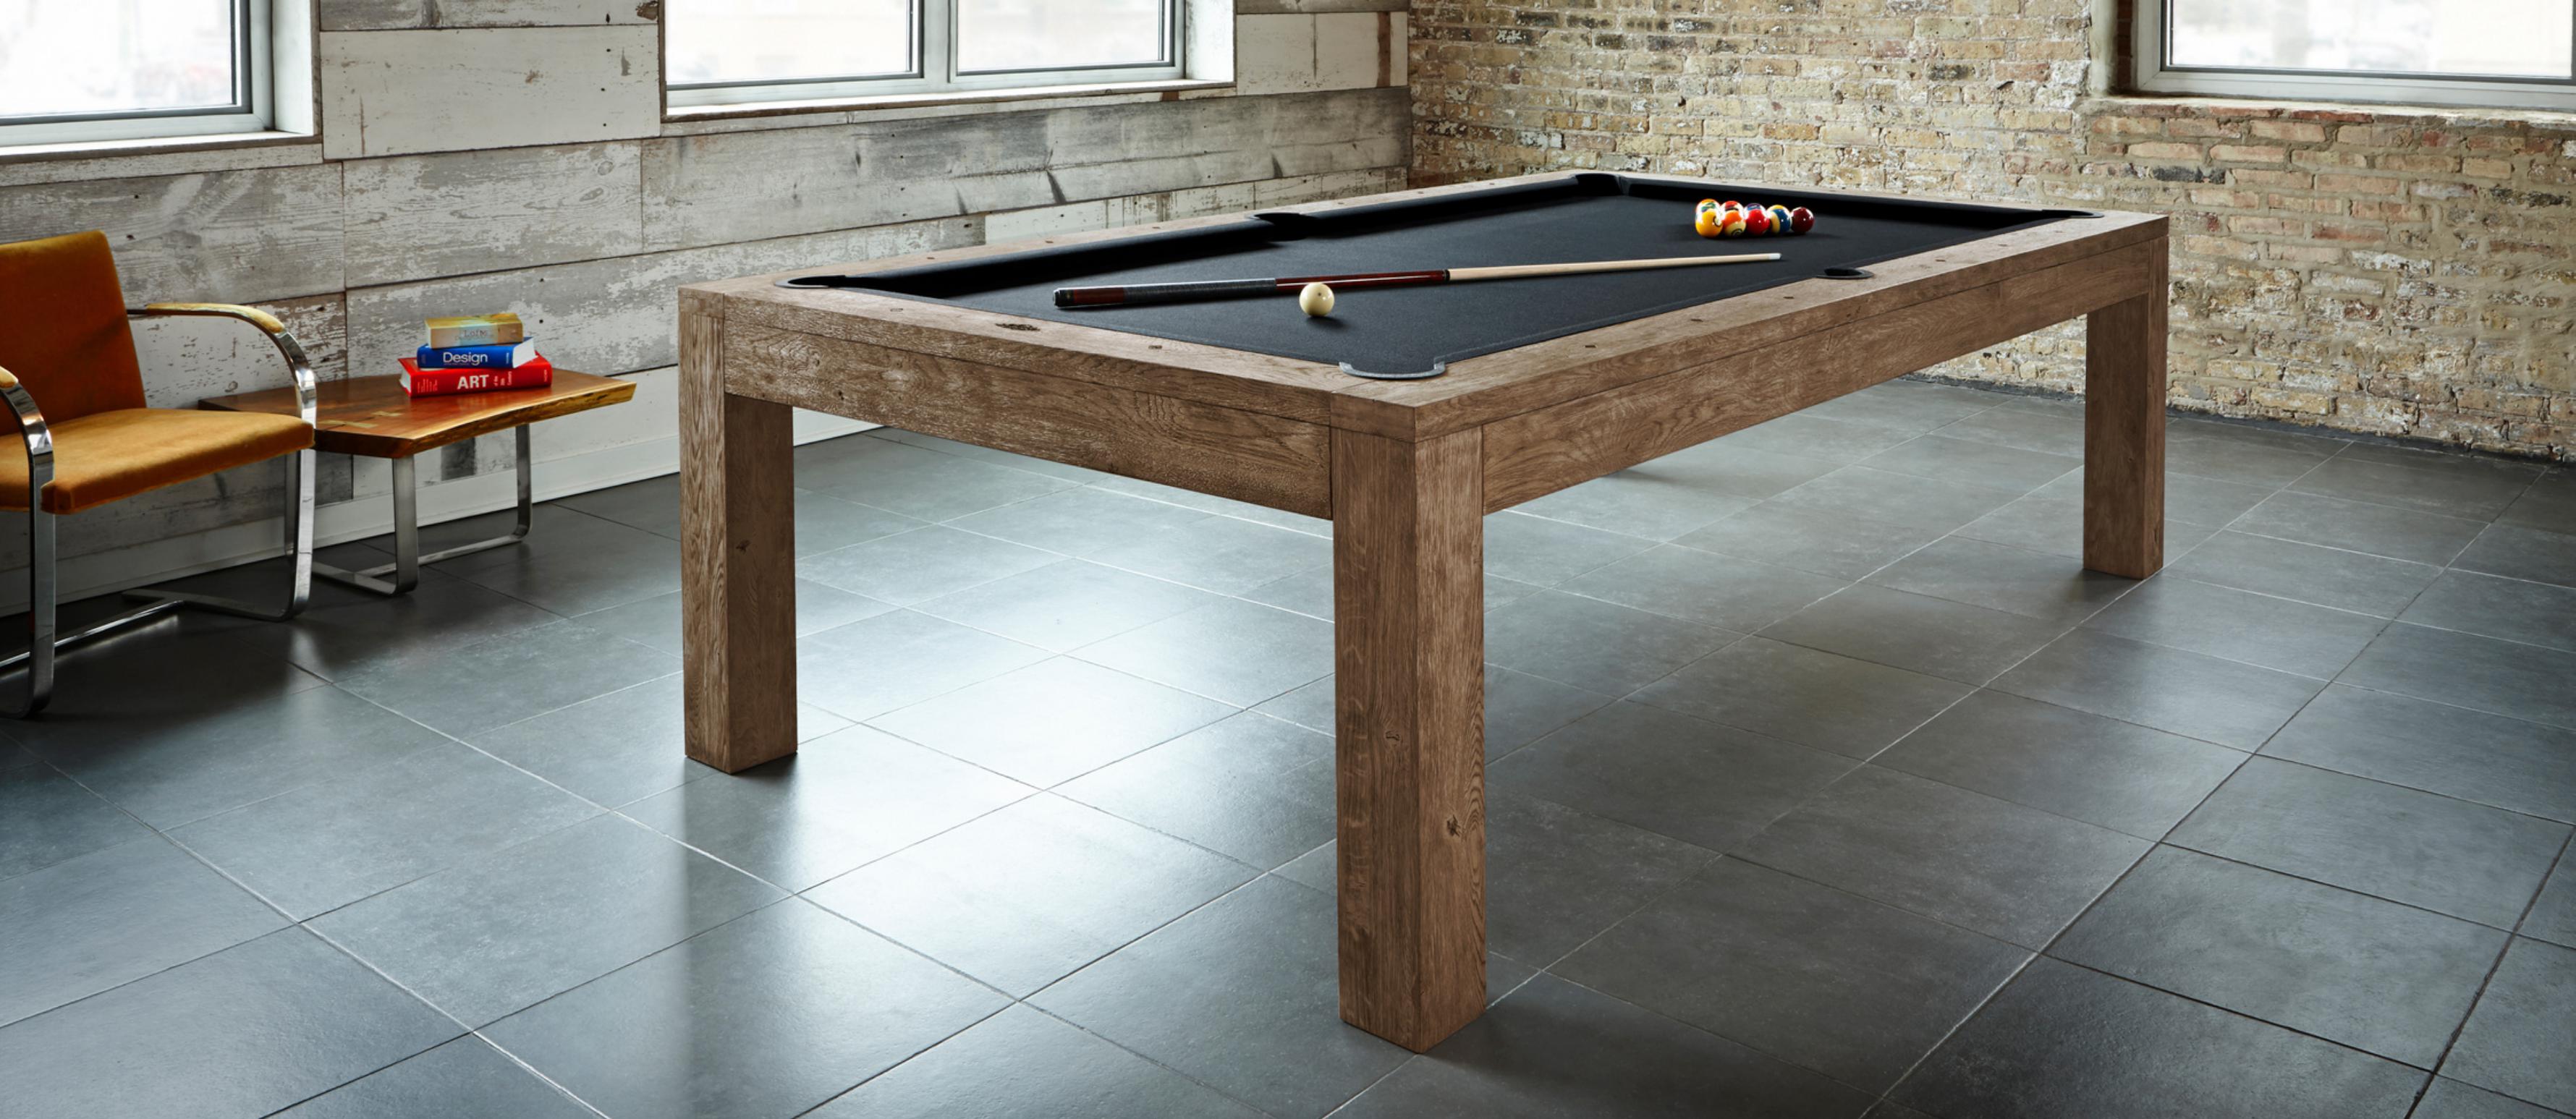 Affordable new and used Pool Tables, Game Room Equipment and ...